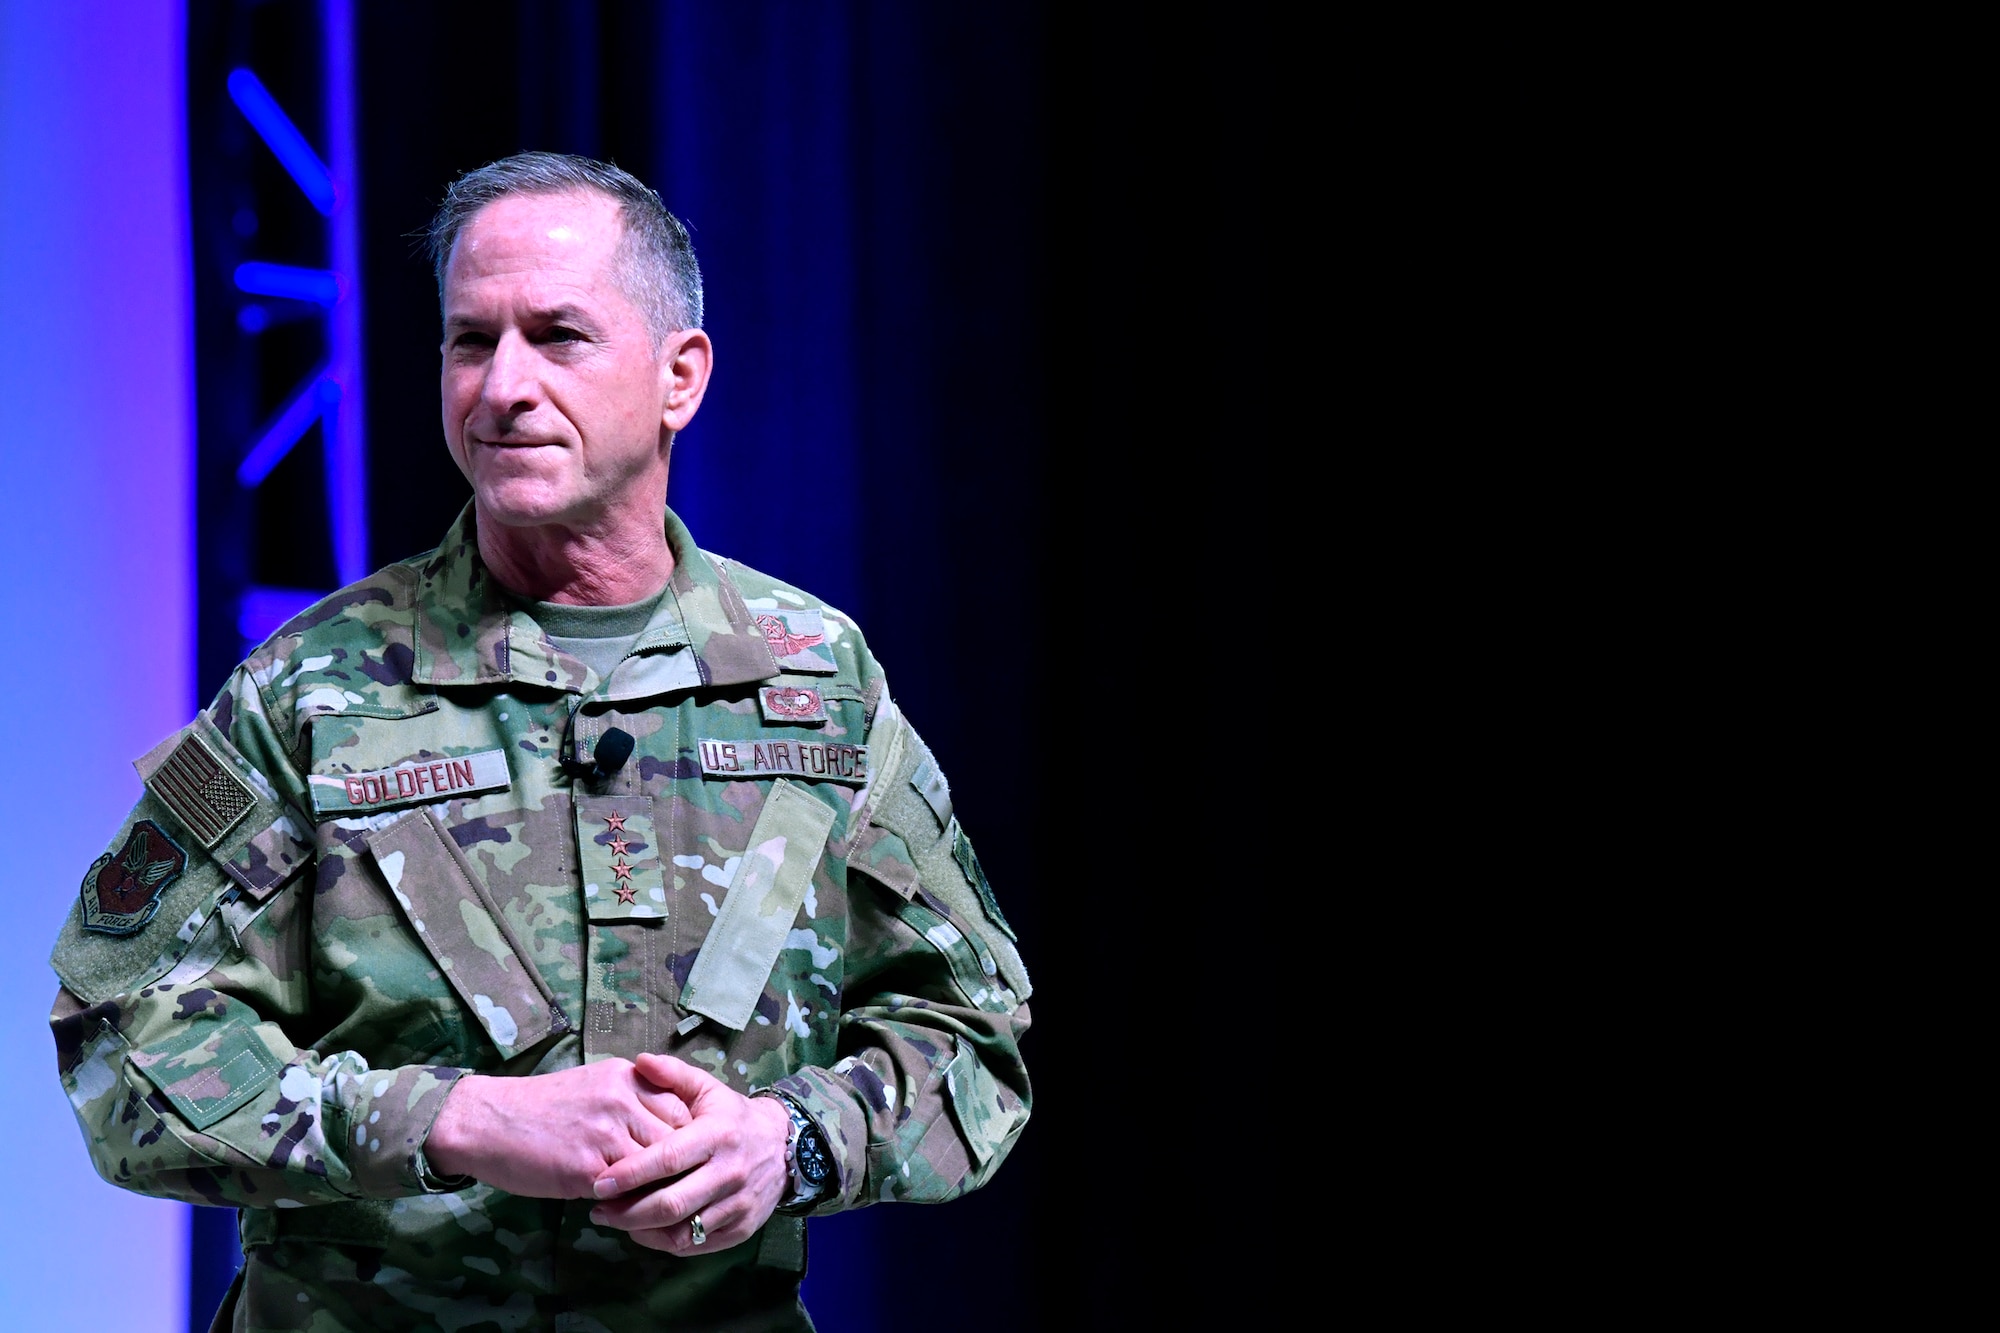 Air Force Chief of Staff Gen. David L. Goldfein gives remarks during the Air Force Association's Air Warfare Symposium in Orlando, Fla., March 1, 2019. During their remarks Goldfein and Wright highlighted the importance of inspirational and courageous leadership. (U.S. Air Force photo by Wayne Clark)